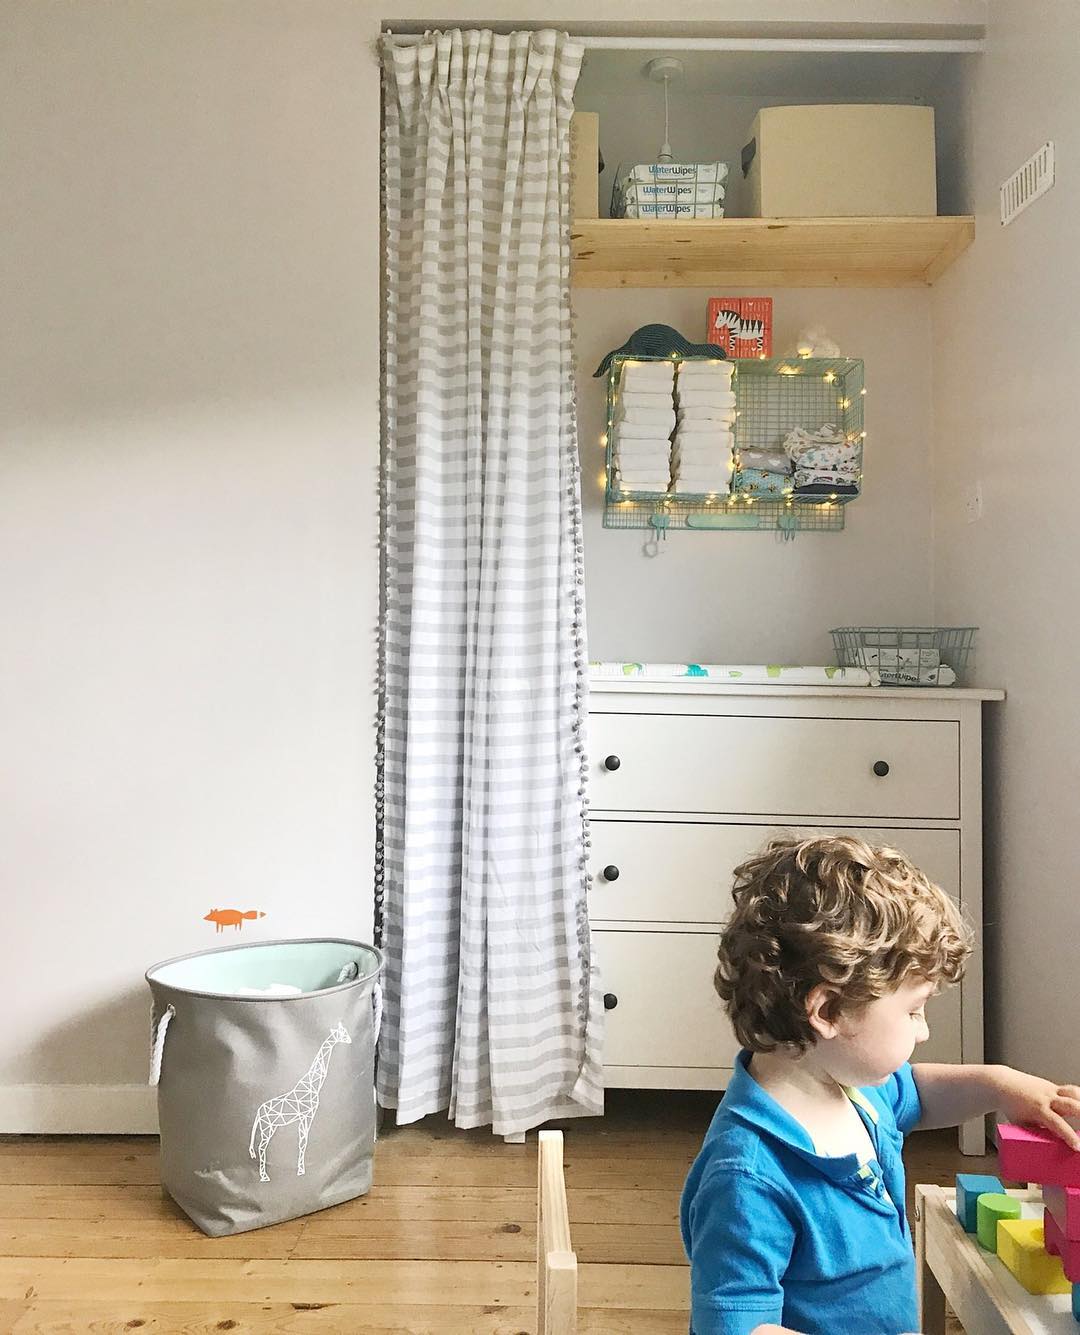 Closet with Changing Table and Curtain. Photo by Instagram user @newaims